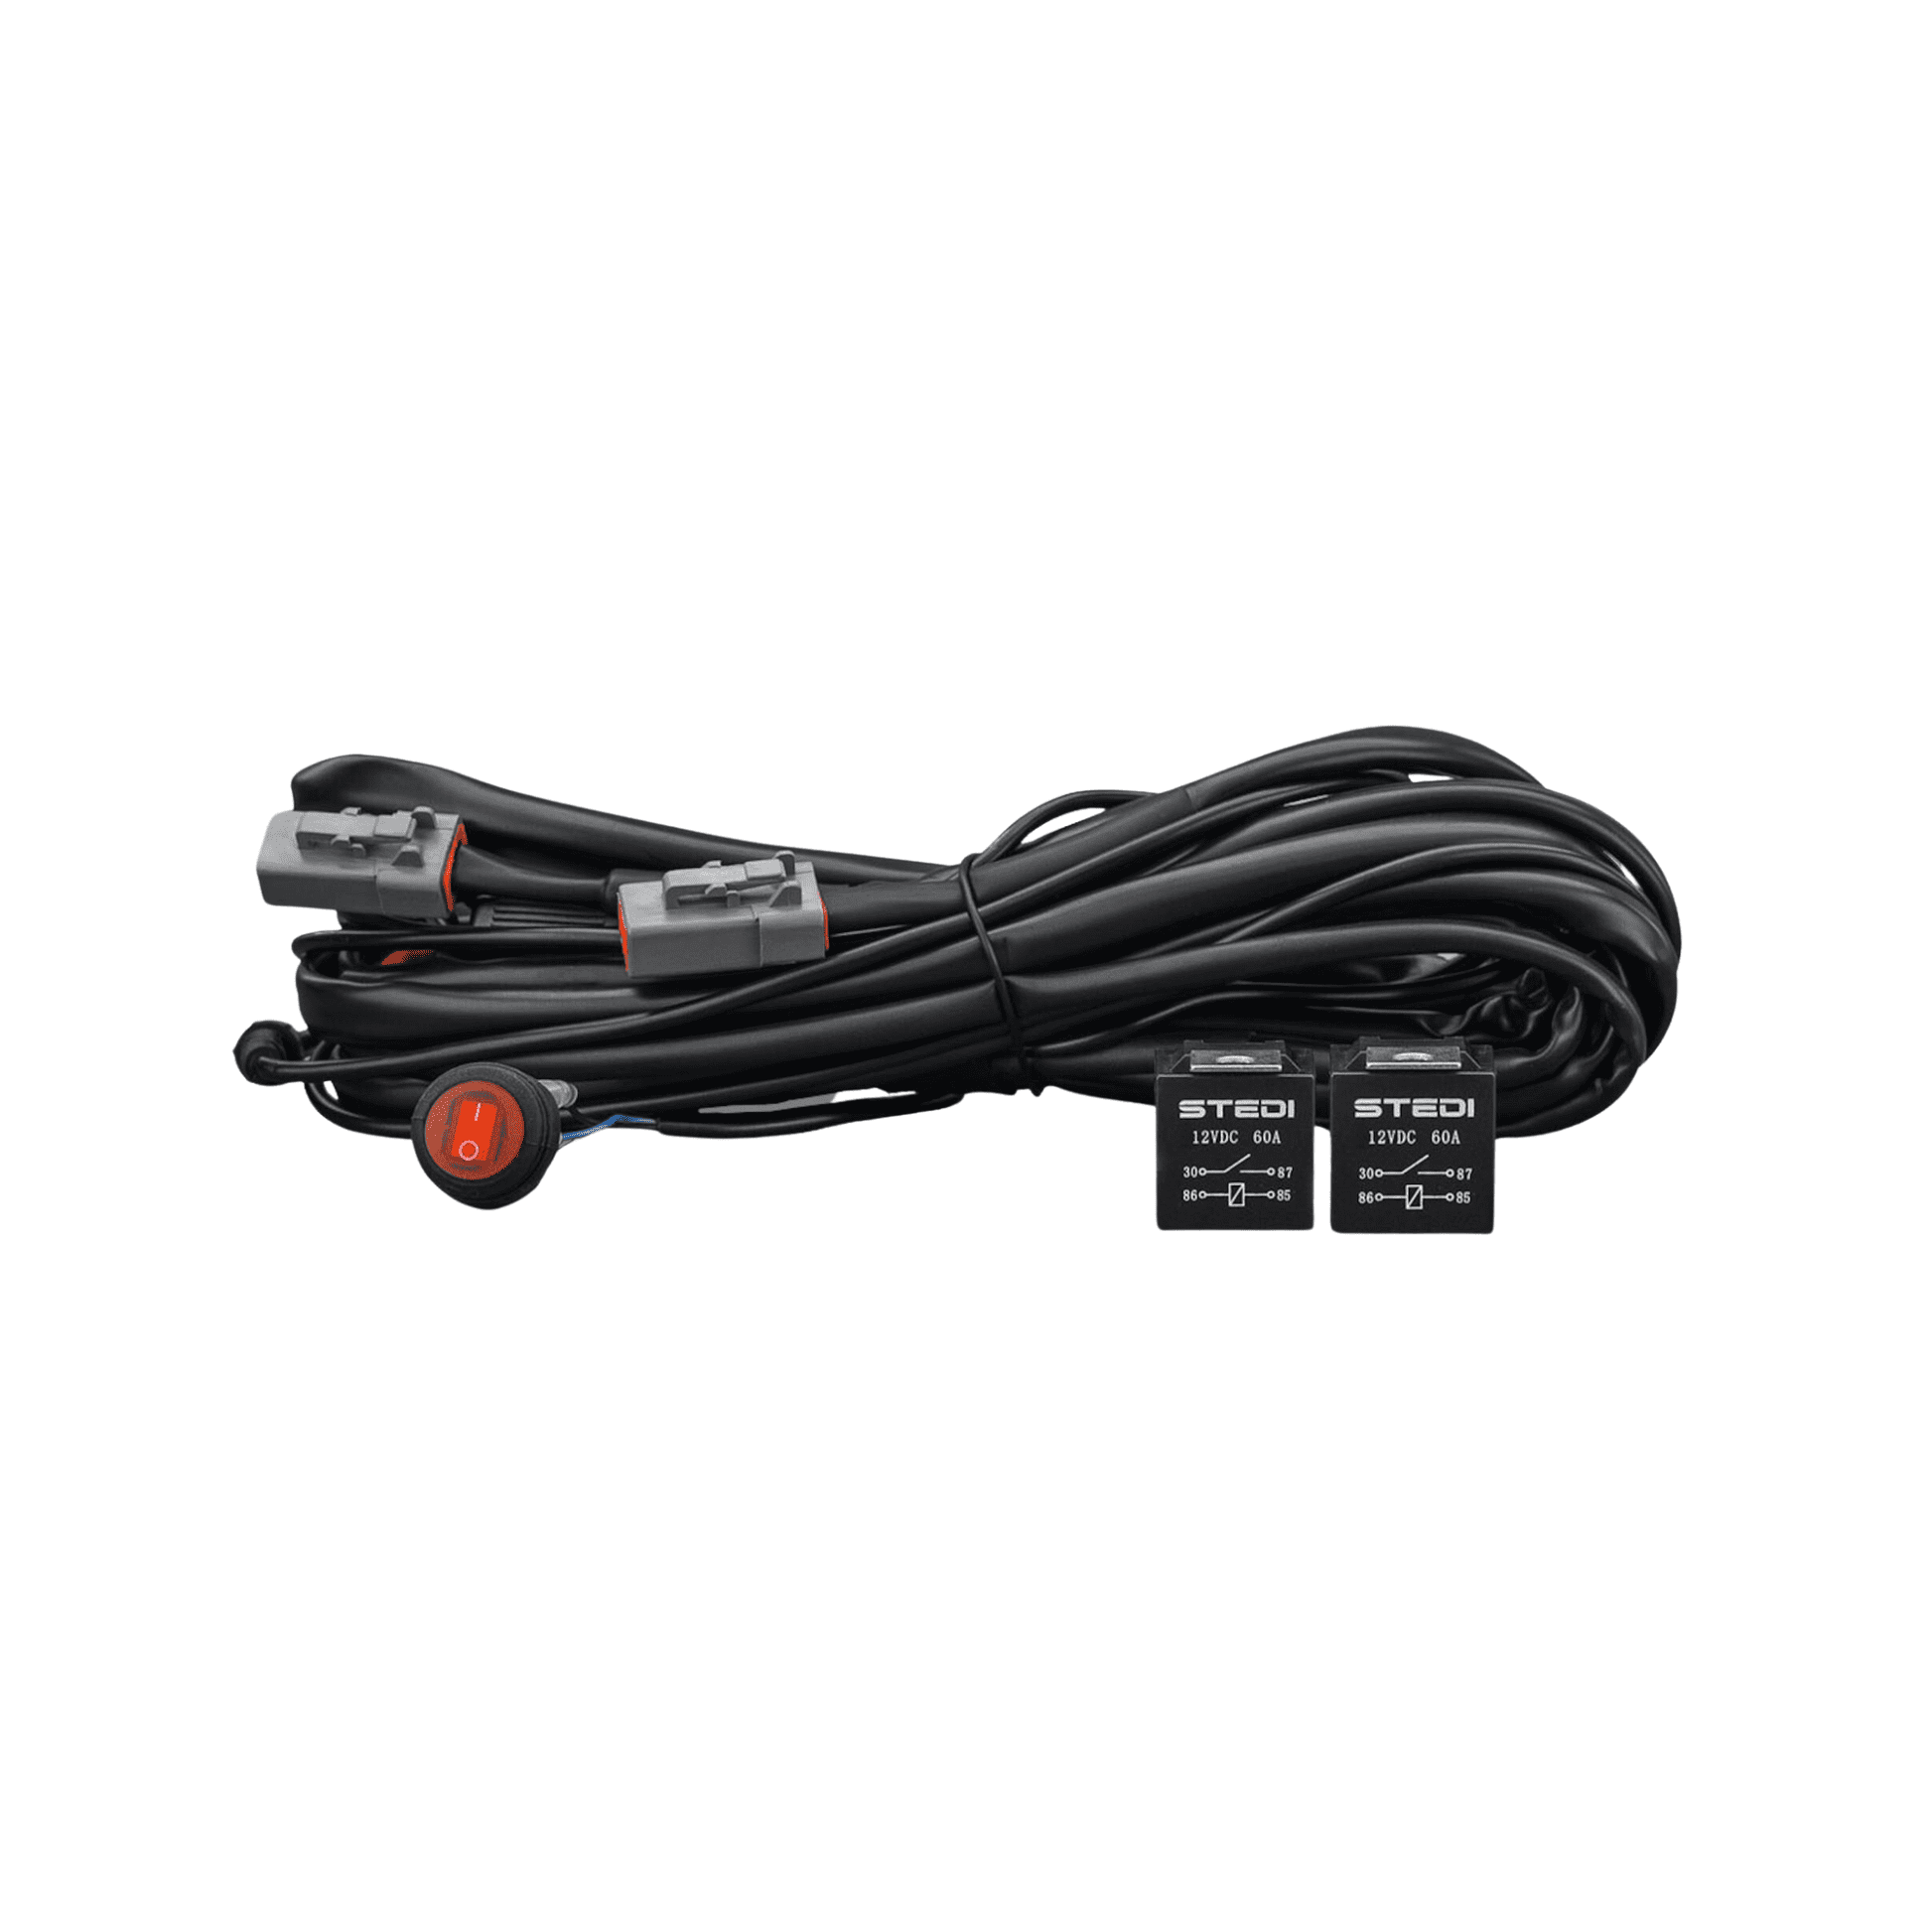 DUAL CONNECTOR PLUG & PLAY SMART HARNESS™ DRIVING LIGHT WIRING (DT CONNECTOR)